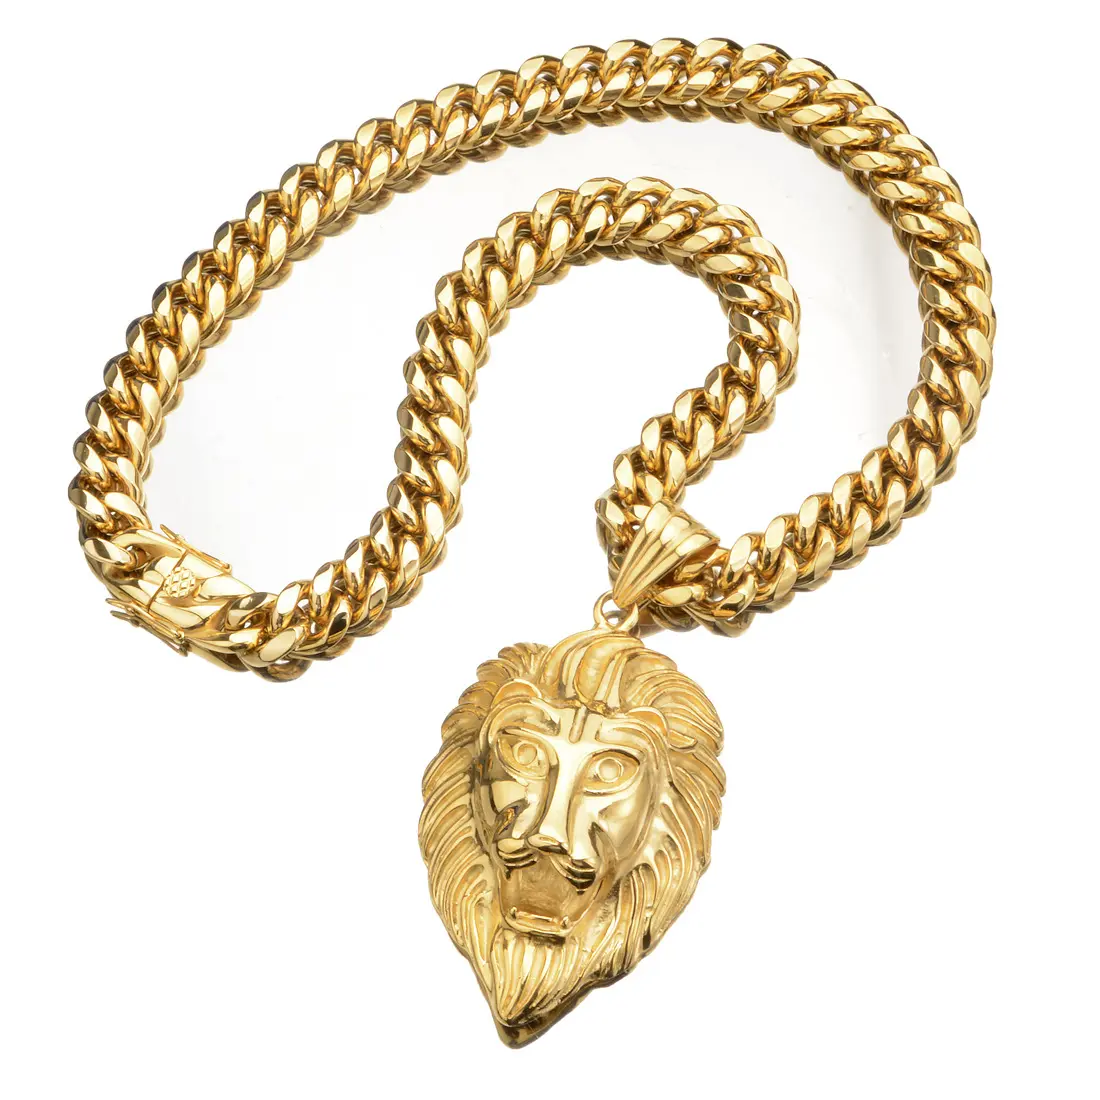 DIRO 14mm punk rock men's stainless steel cuban chain animal jewelry gift lion head pendant gold necklaces